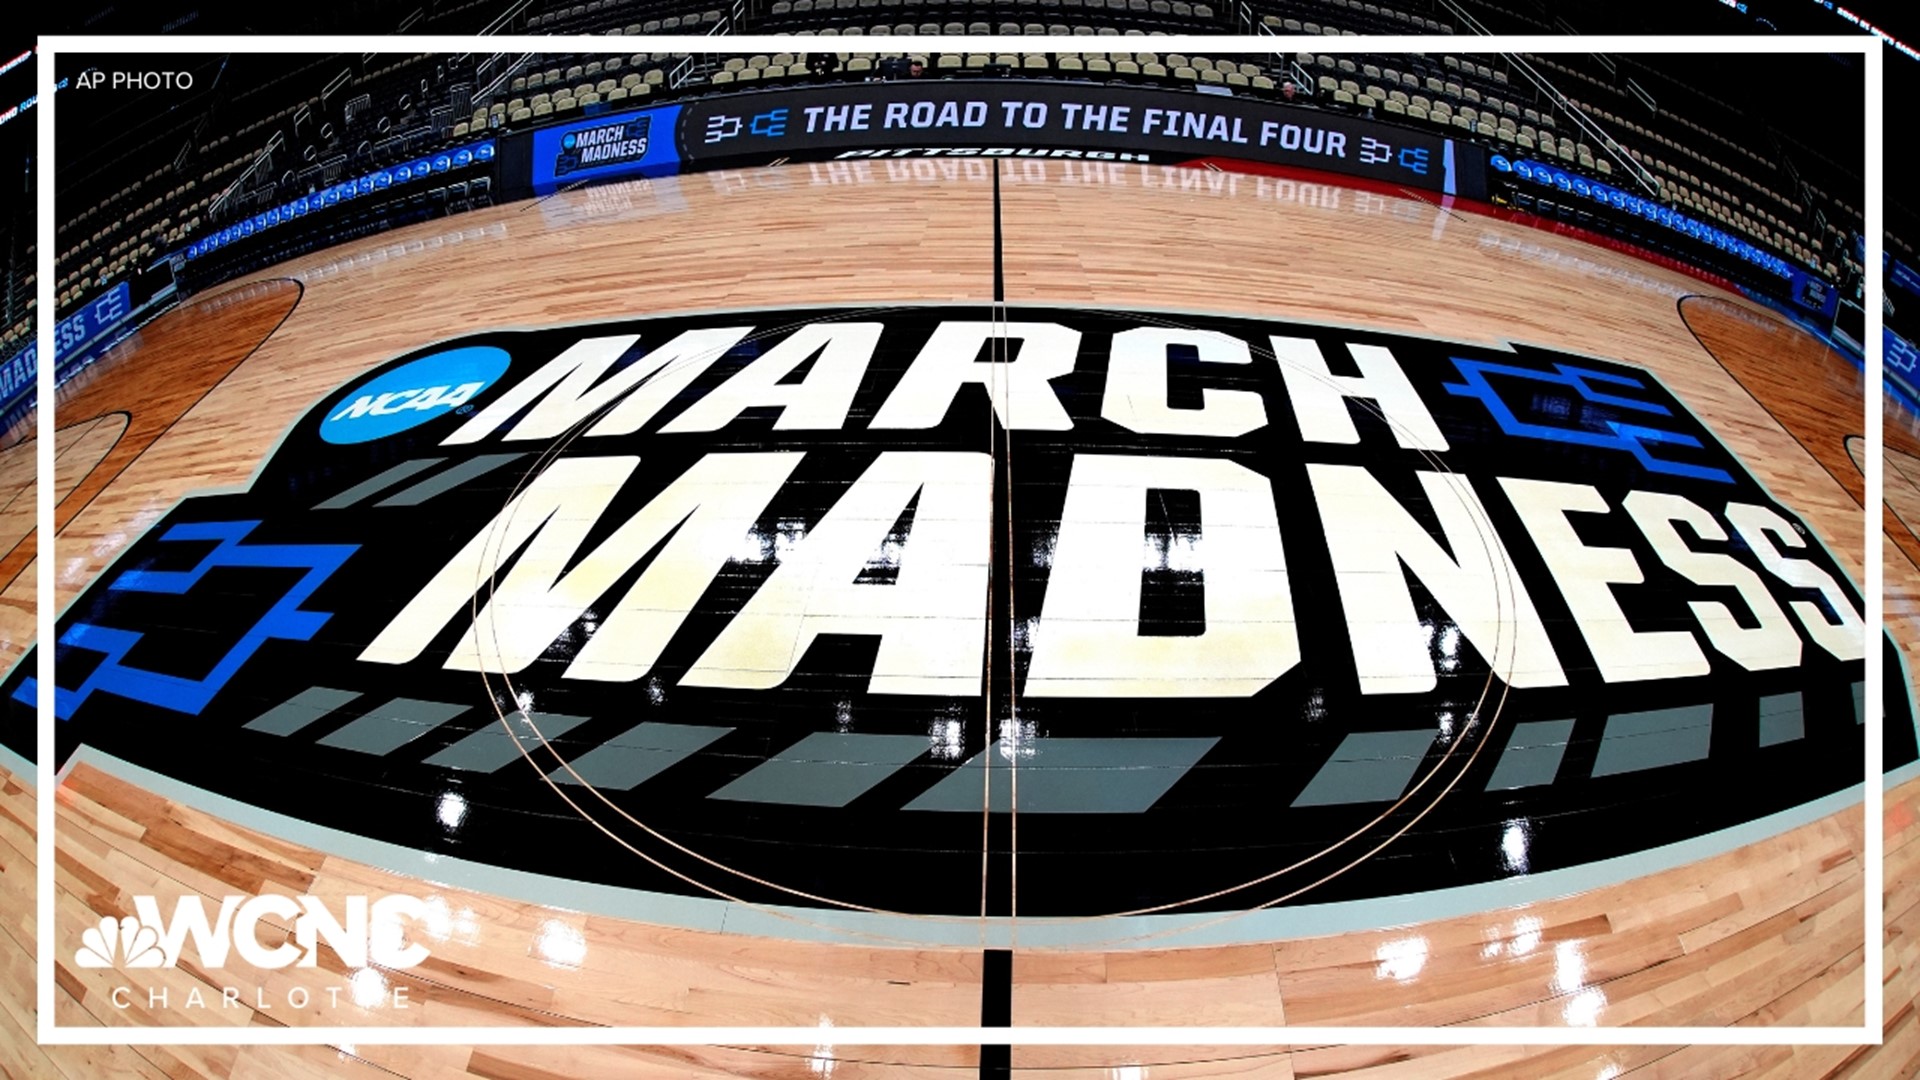 UNC, Duke, NC State, and Clemson have punched their tickets to the Sweet 16 on the men's side.